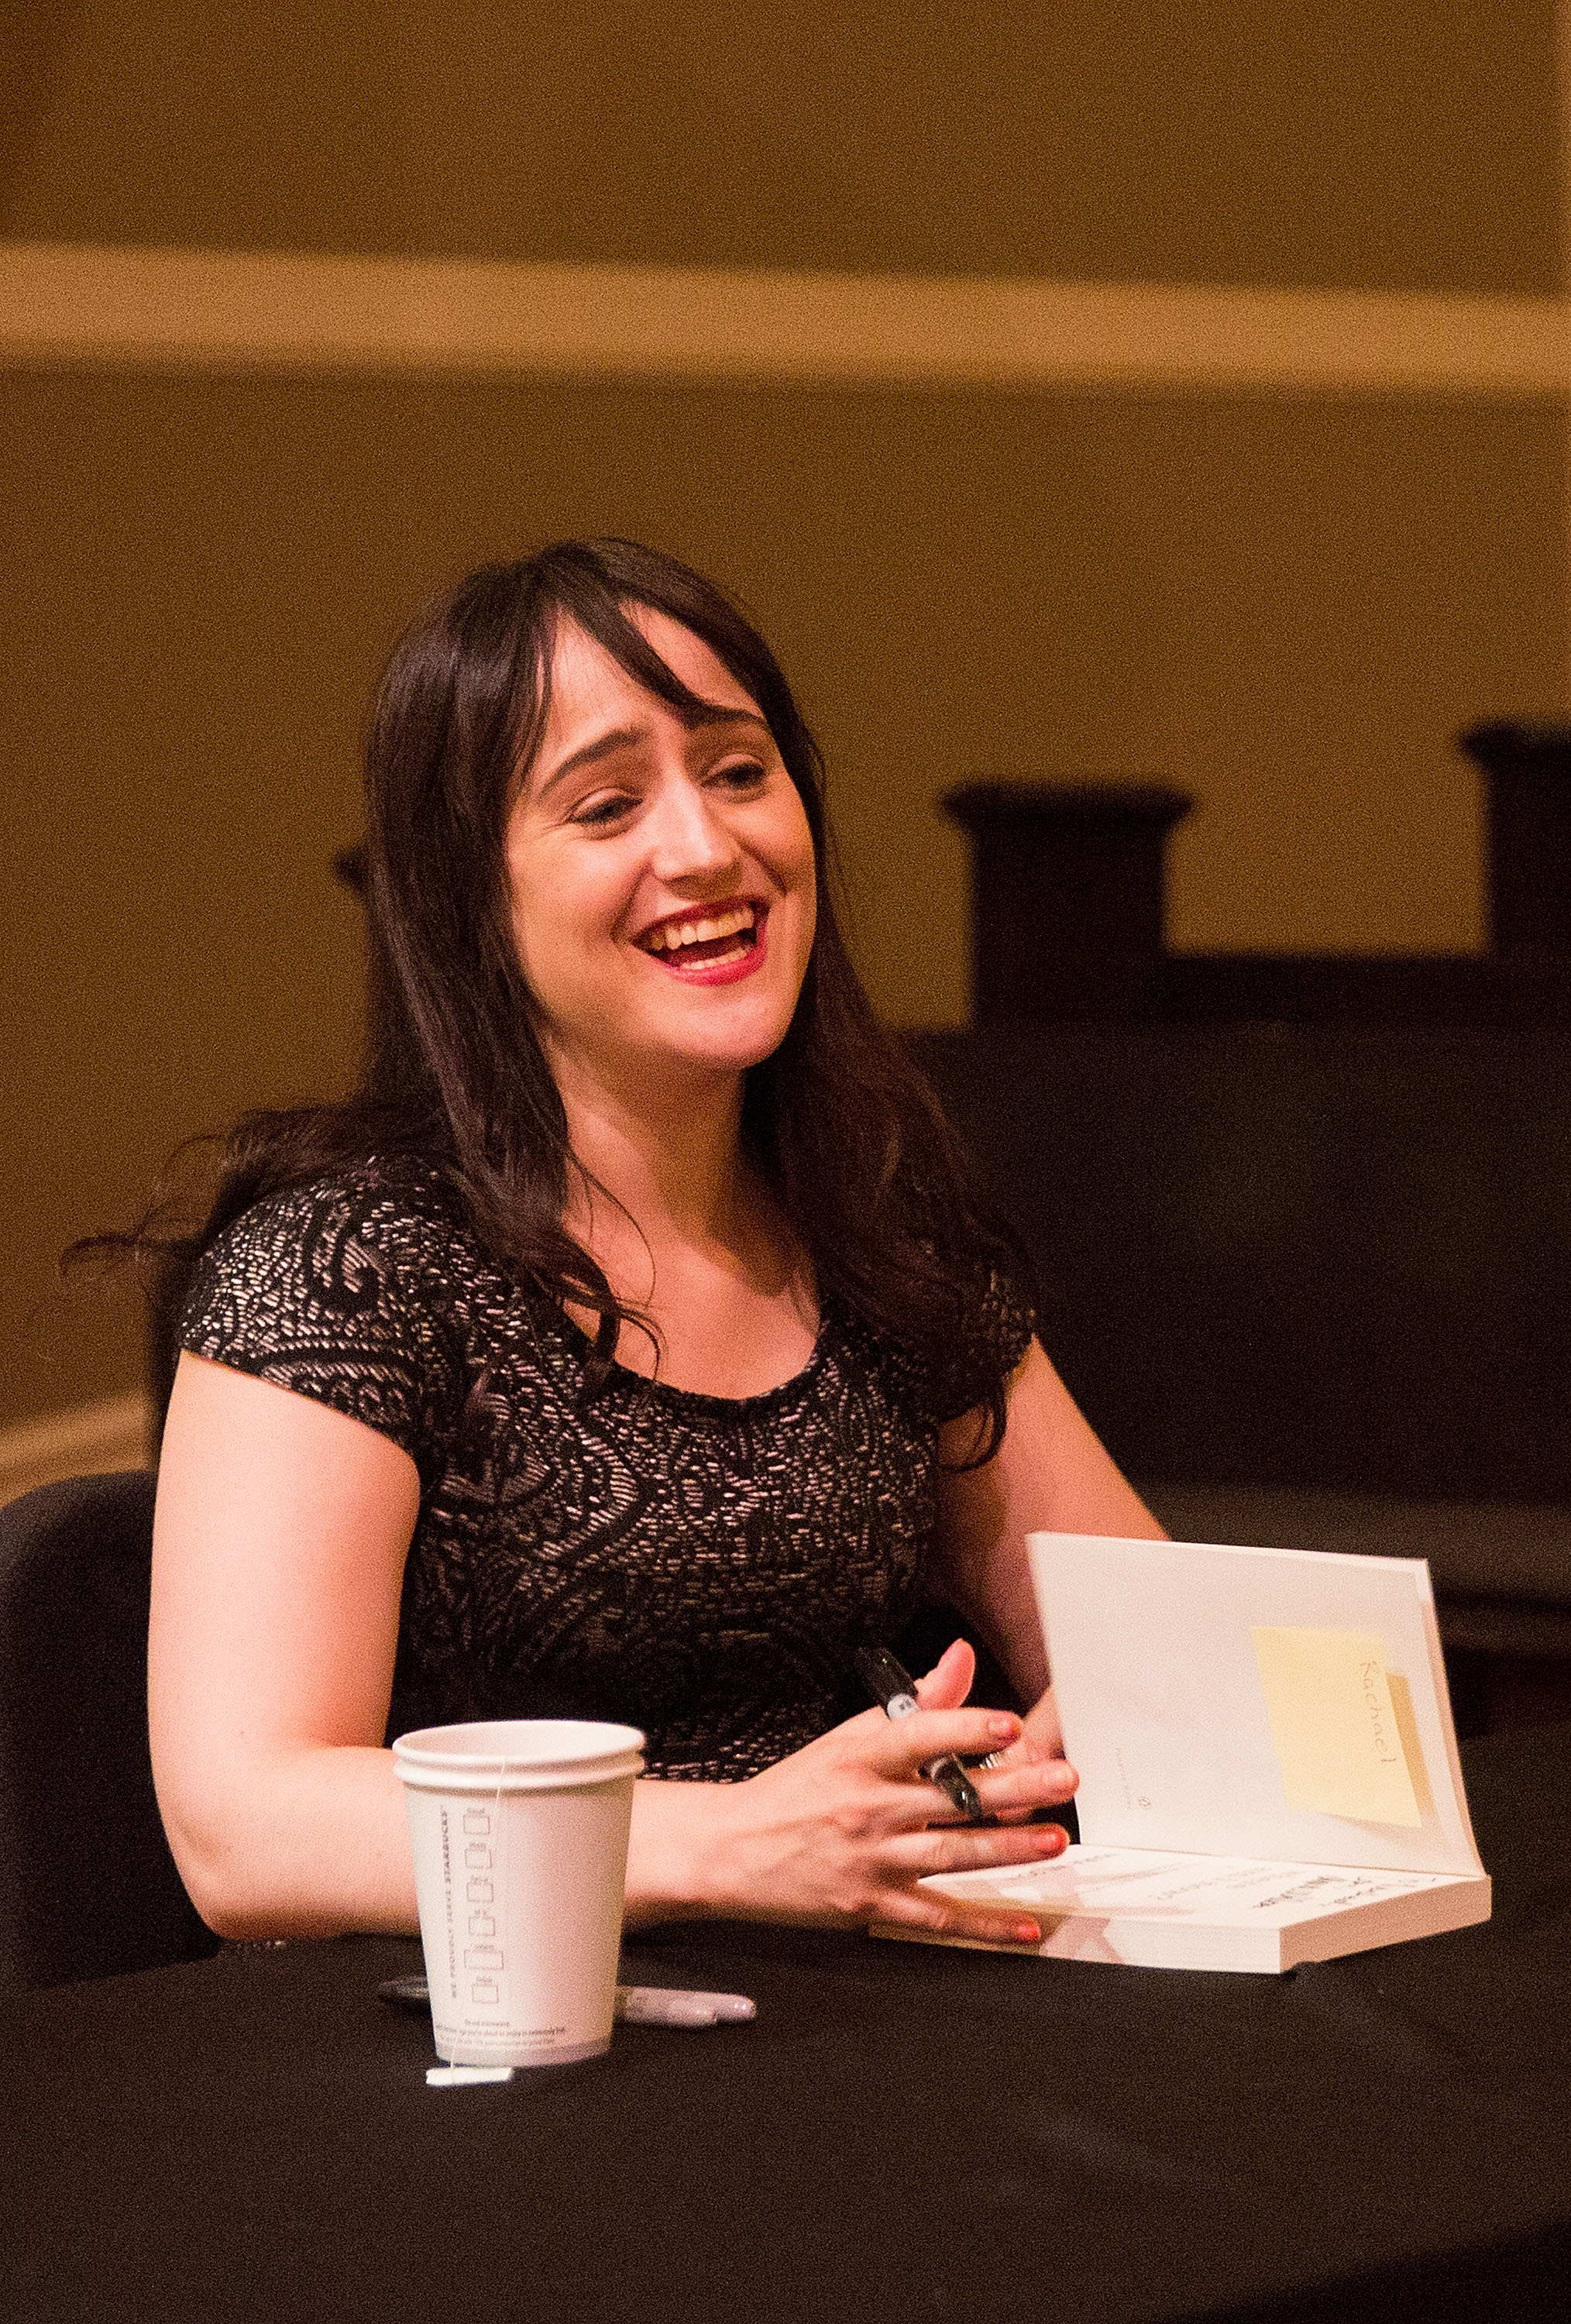 Mara Wilson signs copies of her new book at Town Hall Seattle on September 21, 2016 in Seattle, Washington. | Source: Getty Images